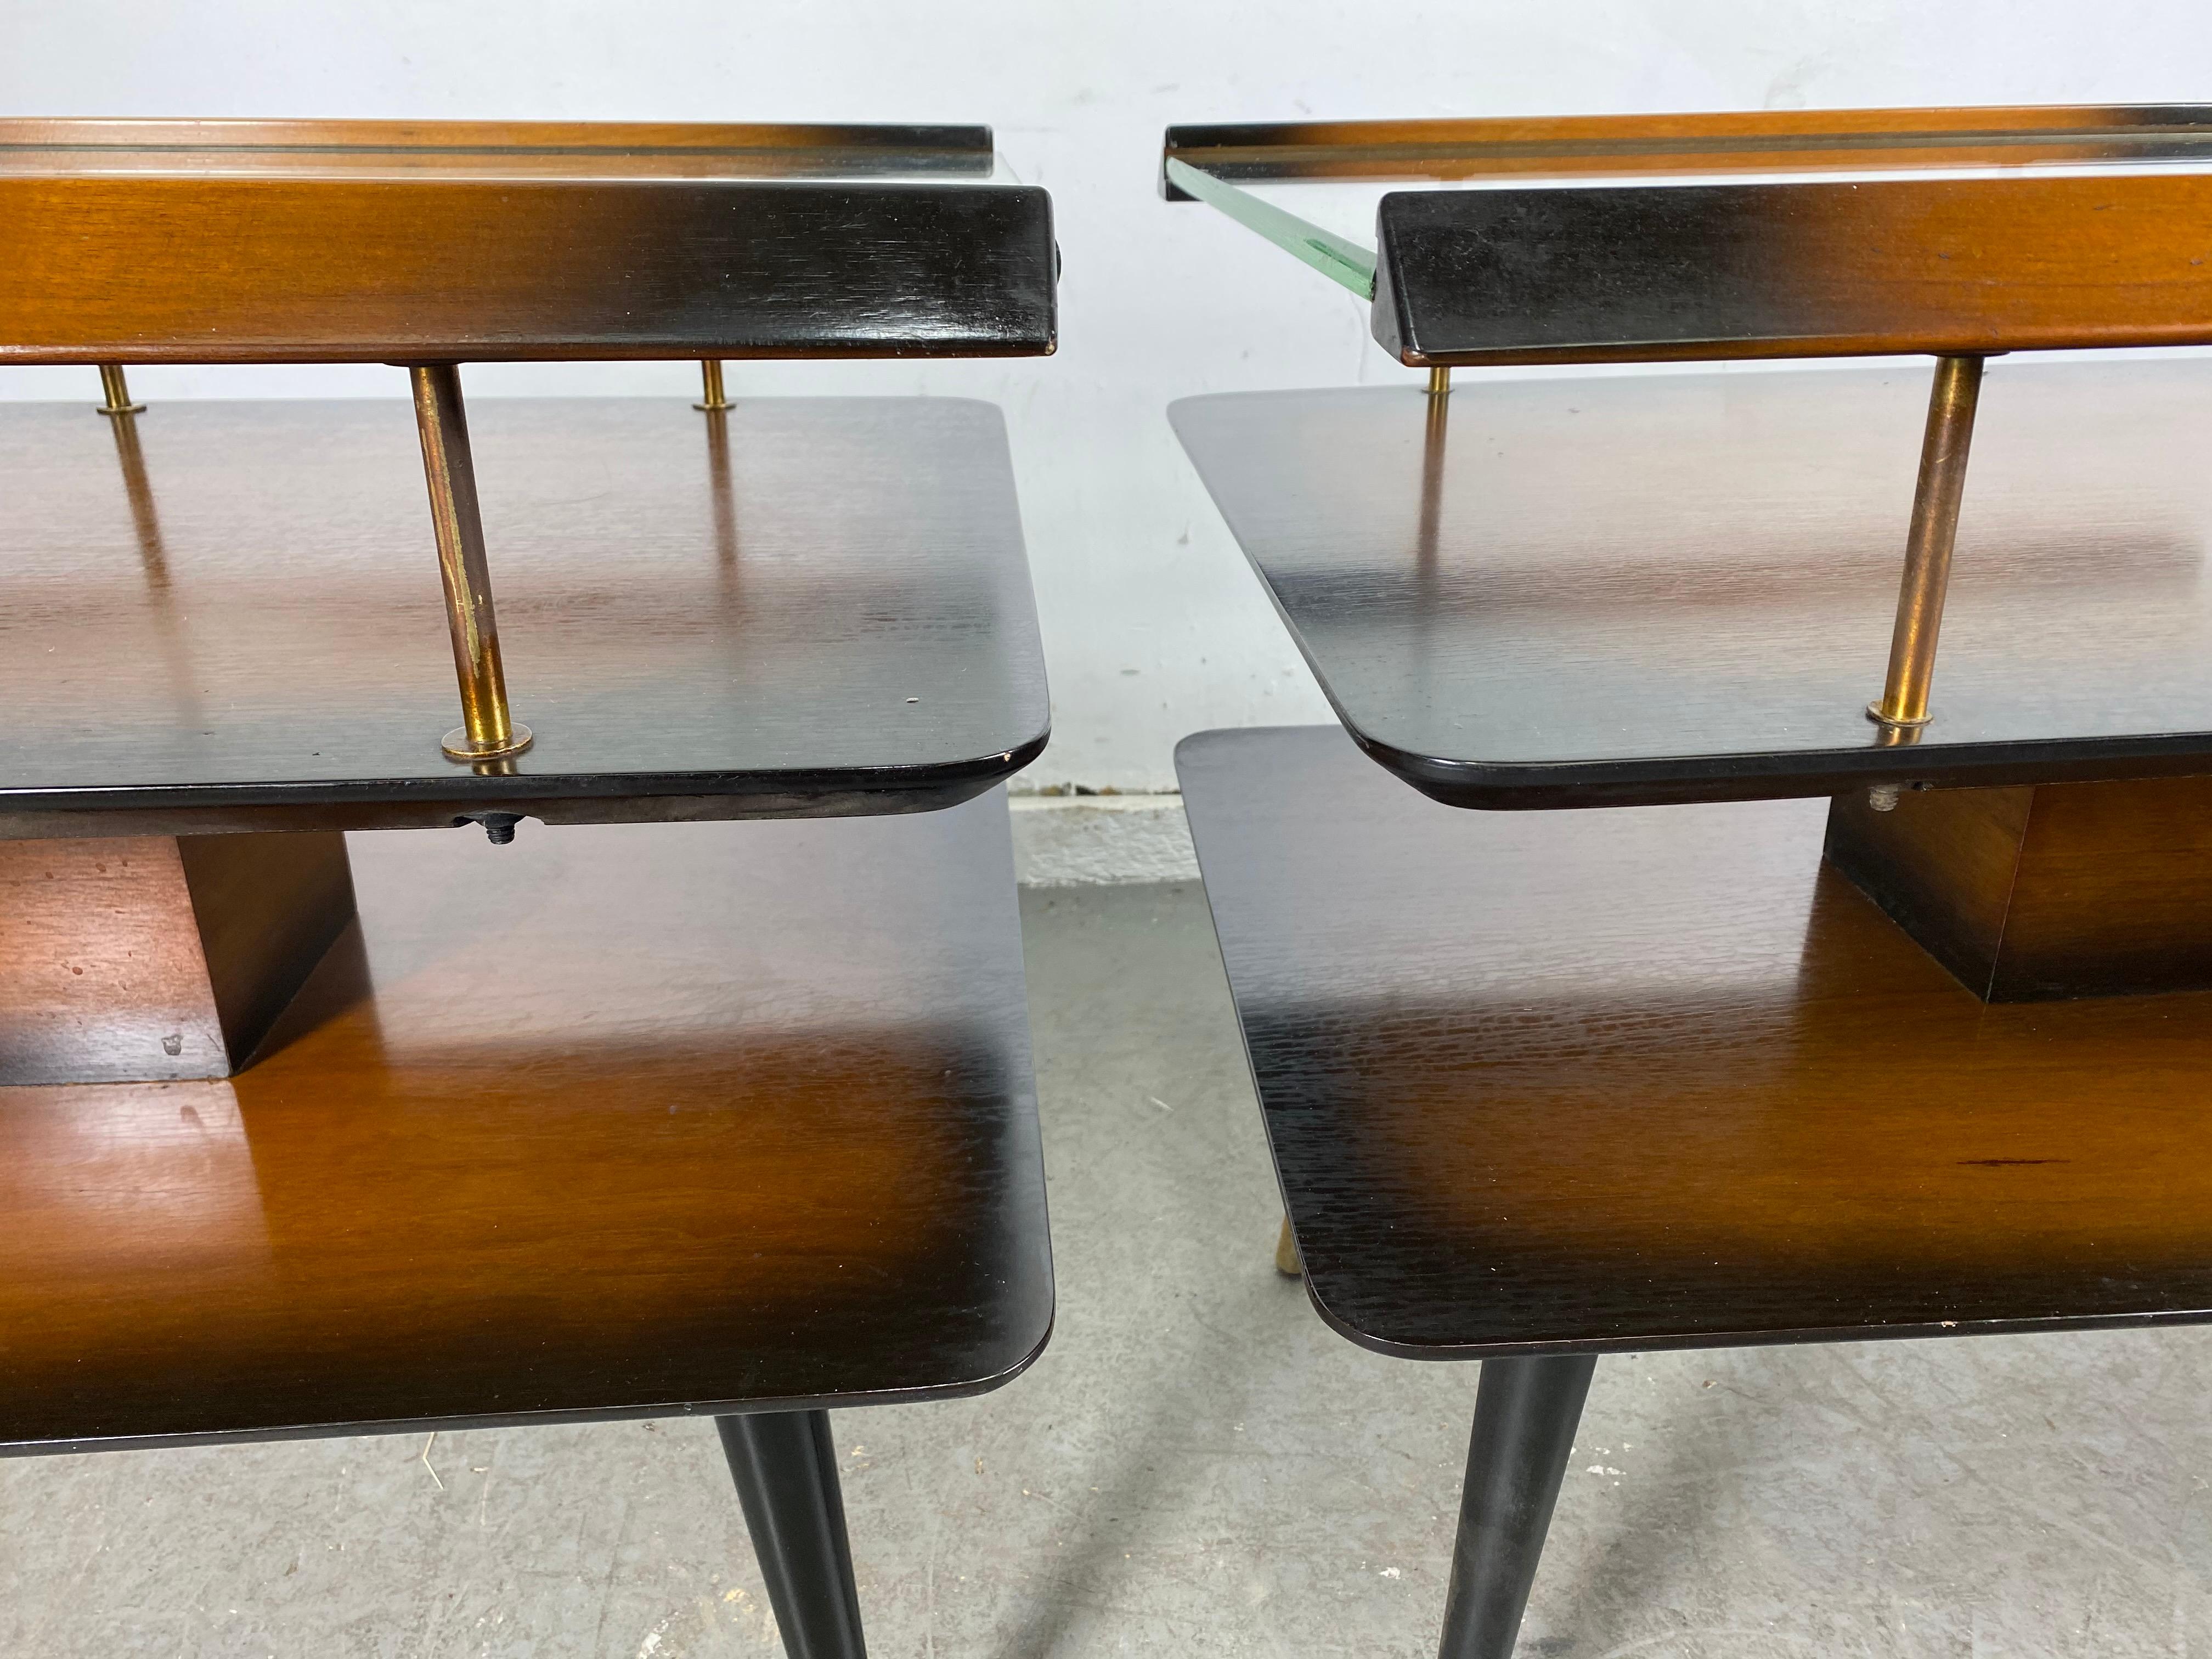 Pair Classic Mid-Century Modern End Tables by James Philip Co. In Good Condition For Sale In Buffalo, NY